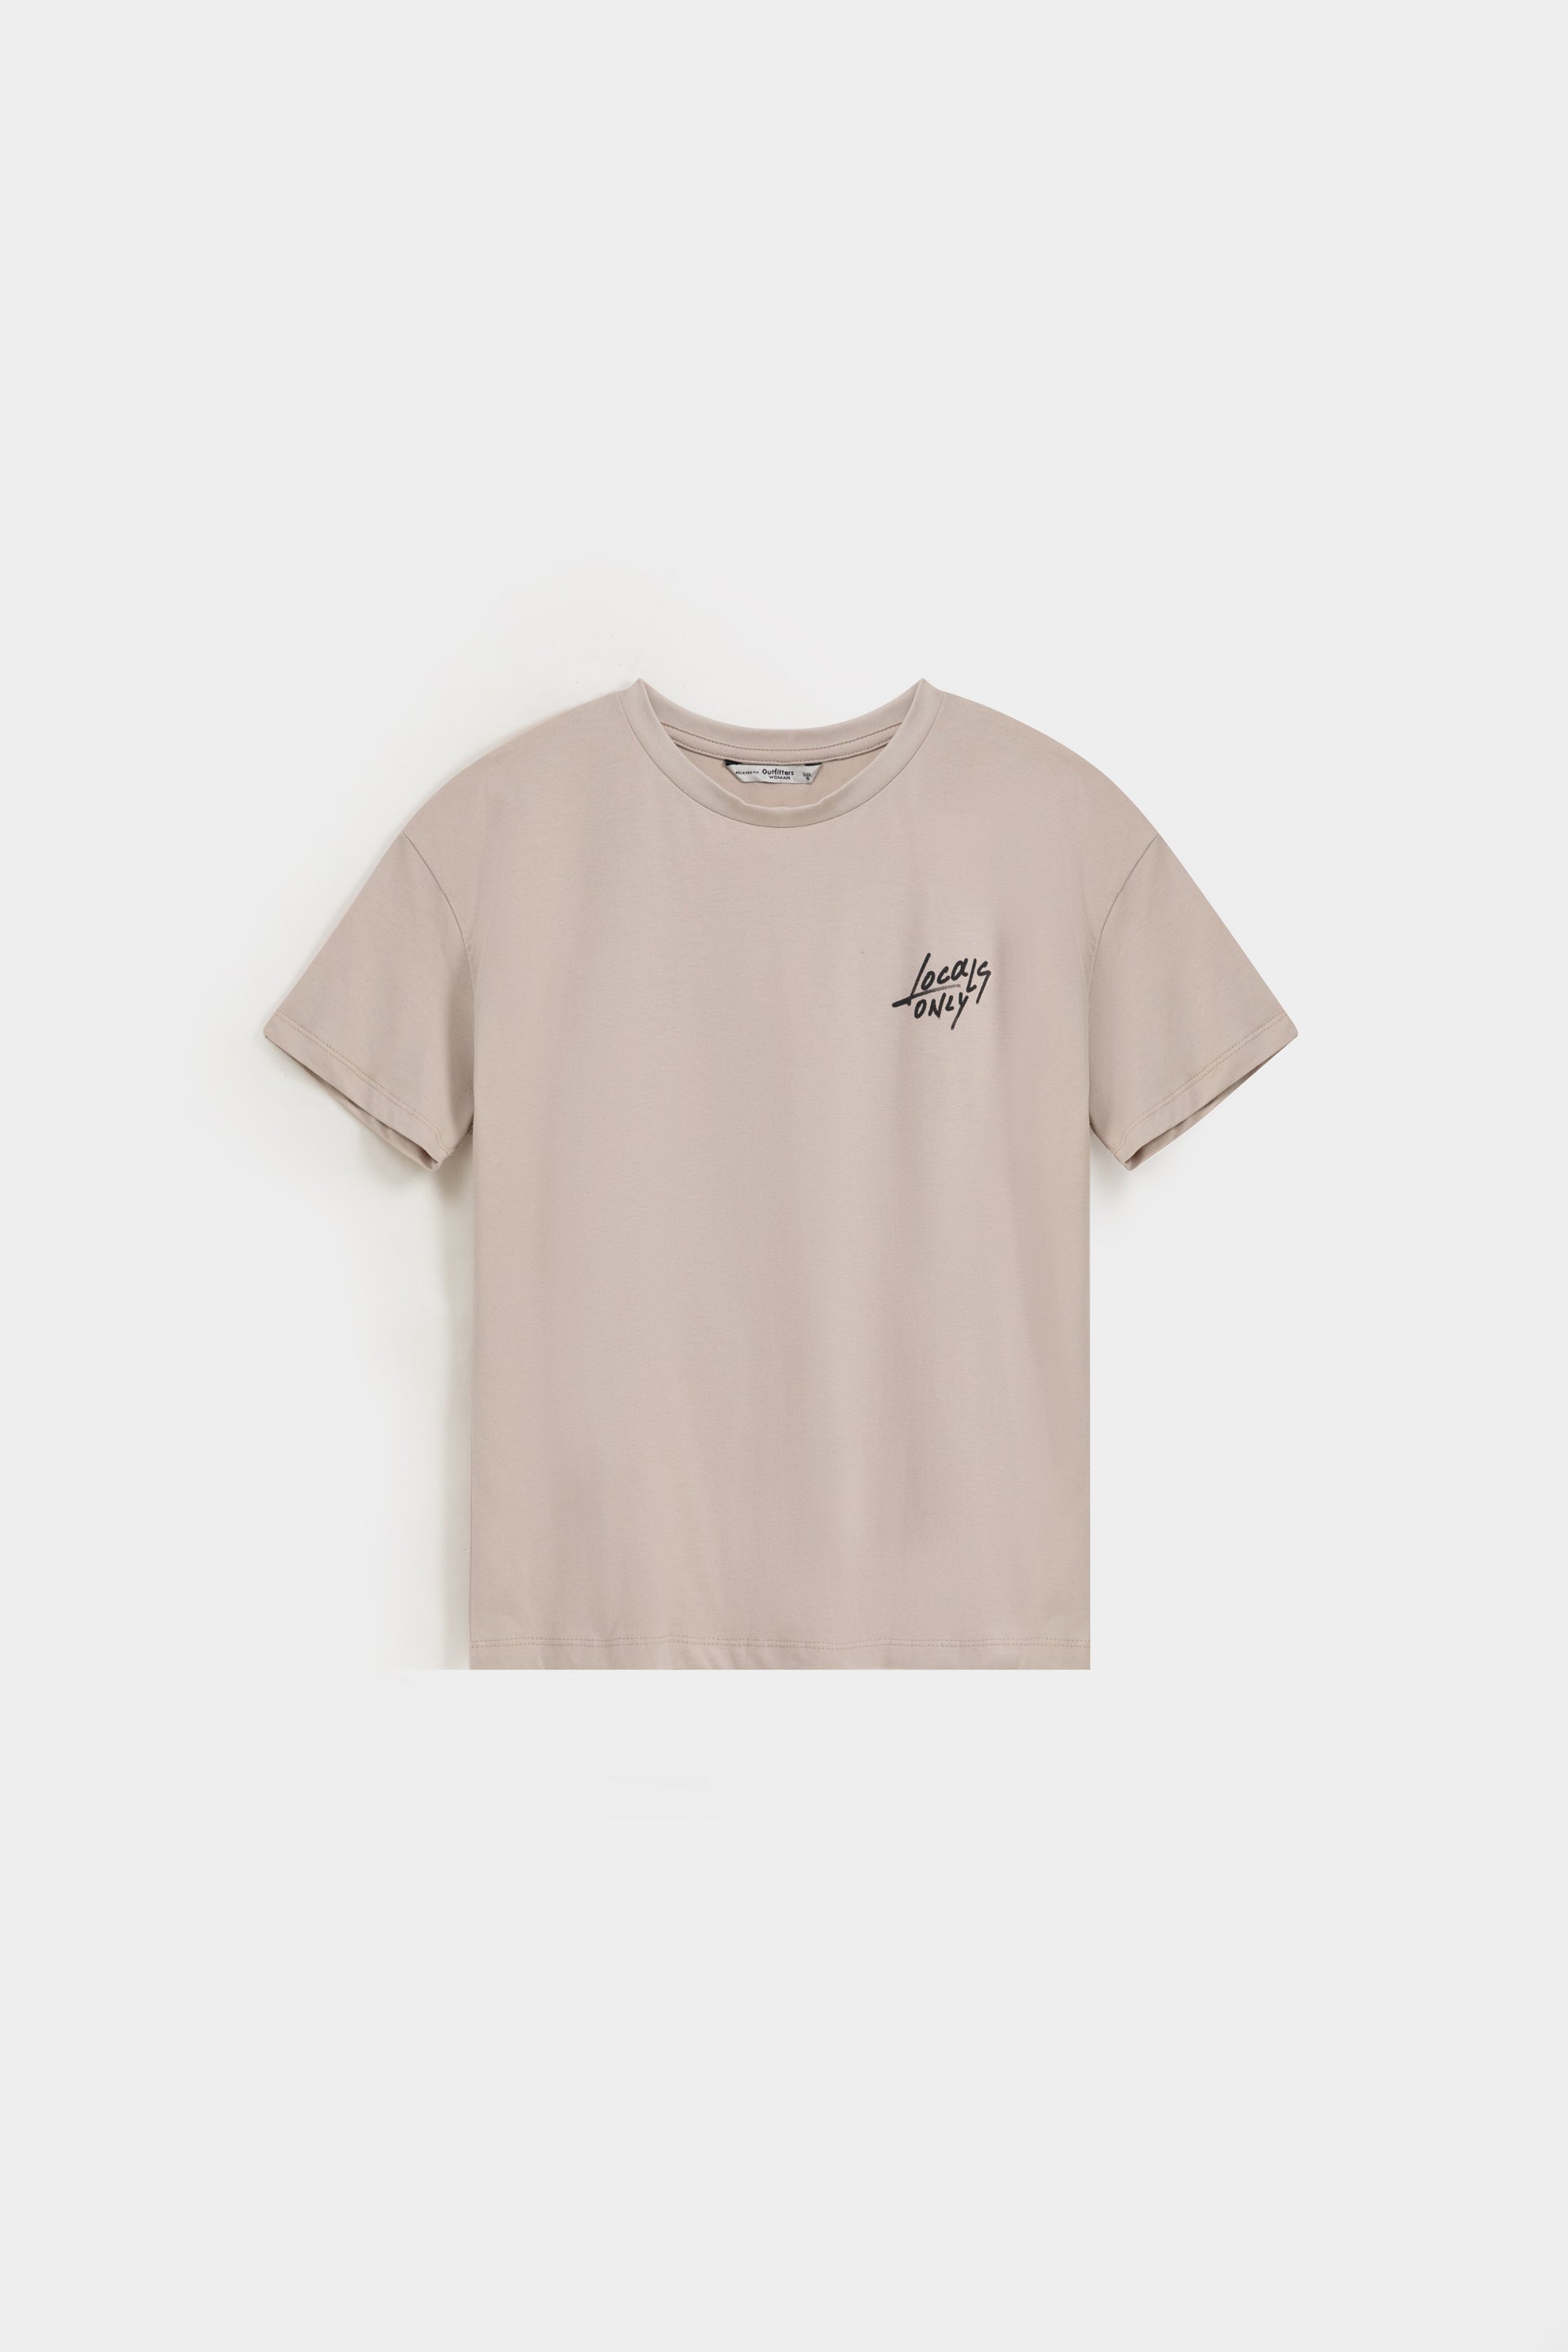 Locals Only Graphic T-shirt